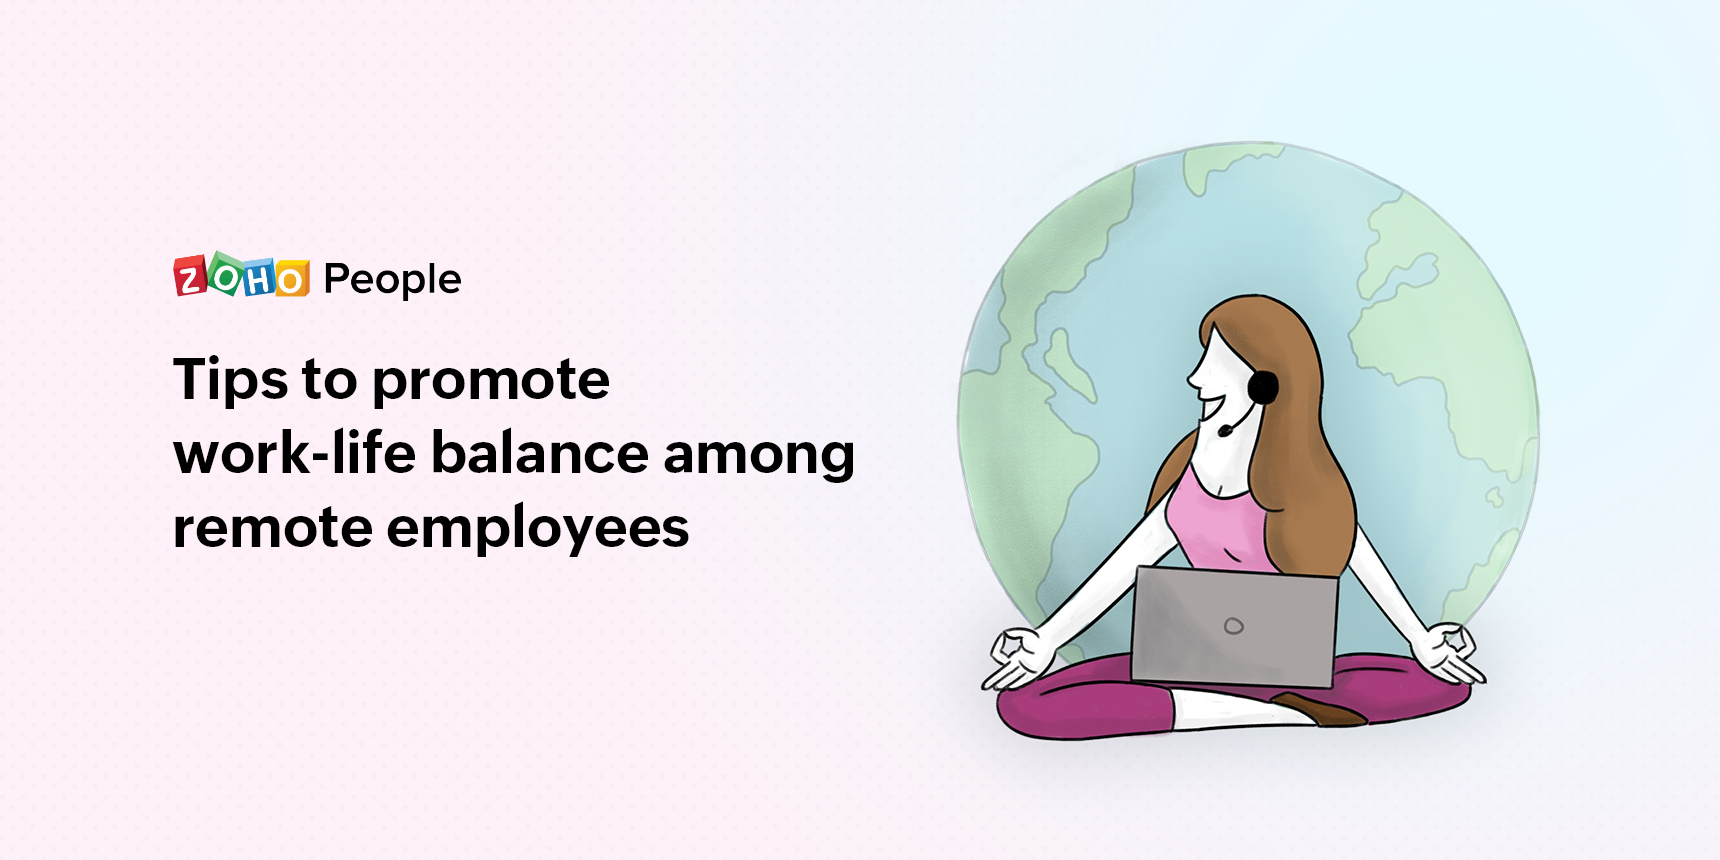 Tips to improve work-life balance for remote employees